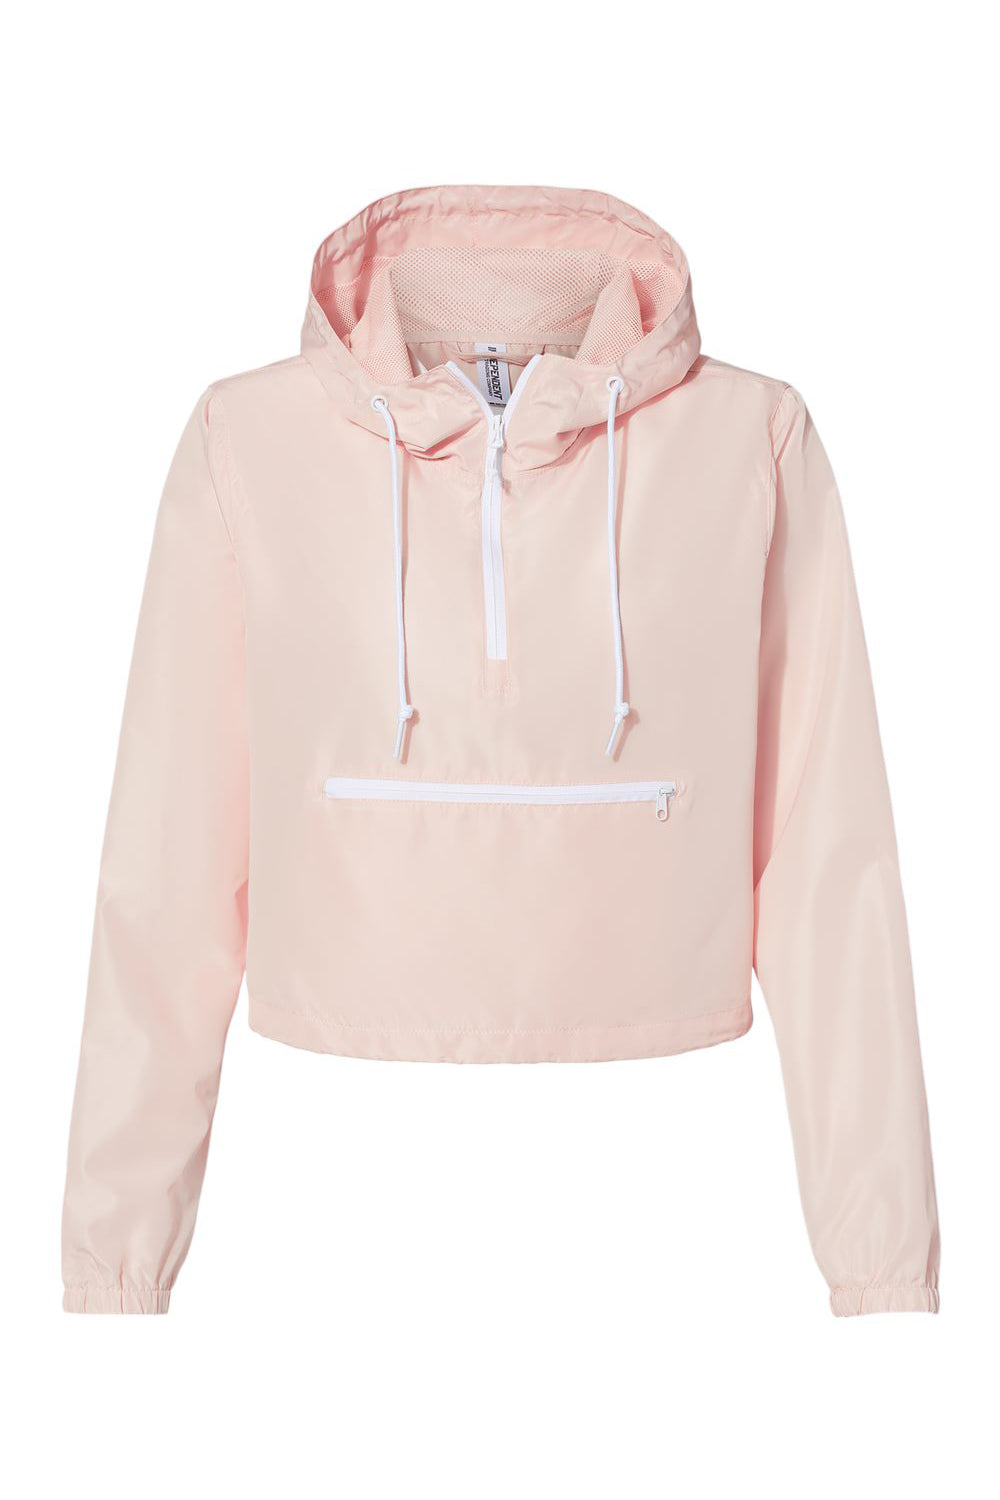 Independent Trading Co. EXP64CRP Womens 1/4 Zip Crop Hooded Windbreaker Jacket Blush Pink Flat Front